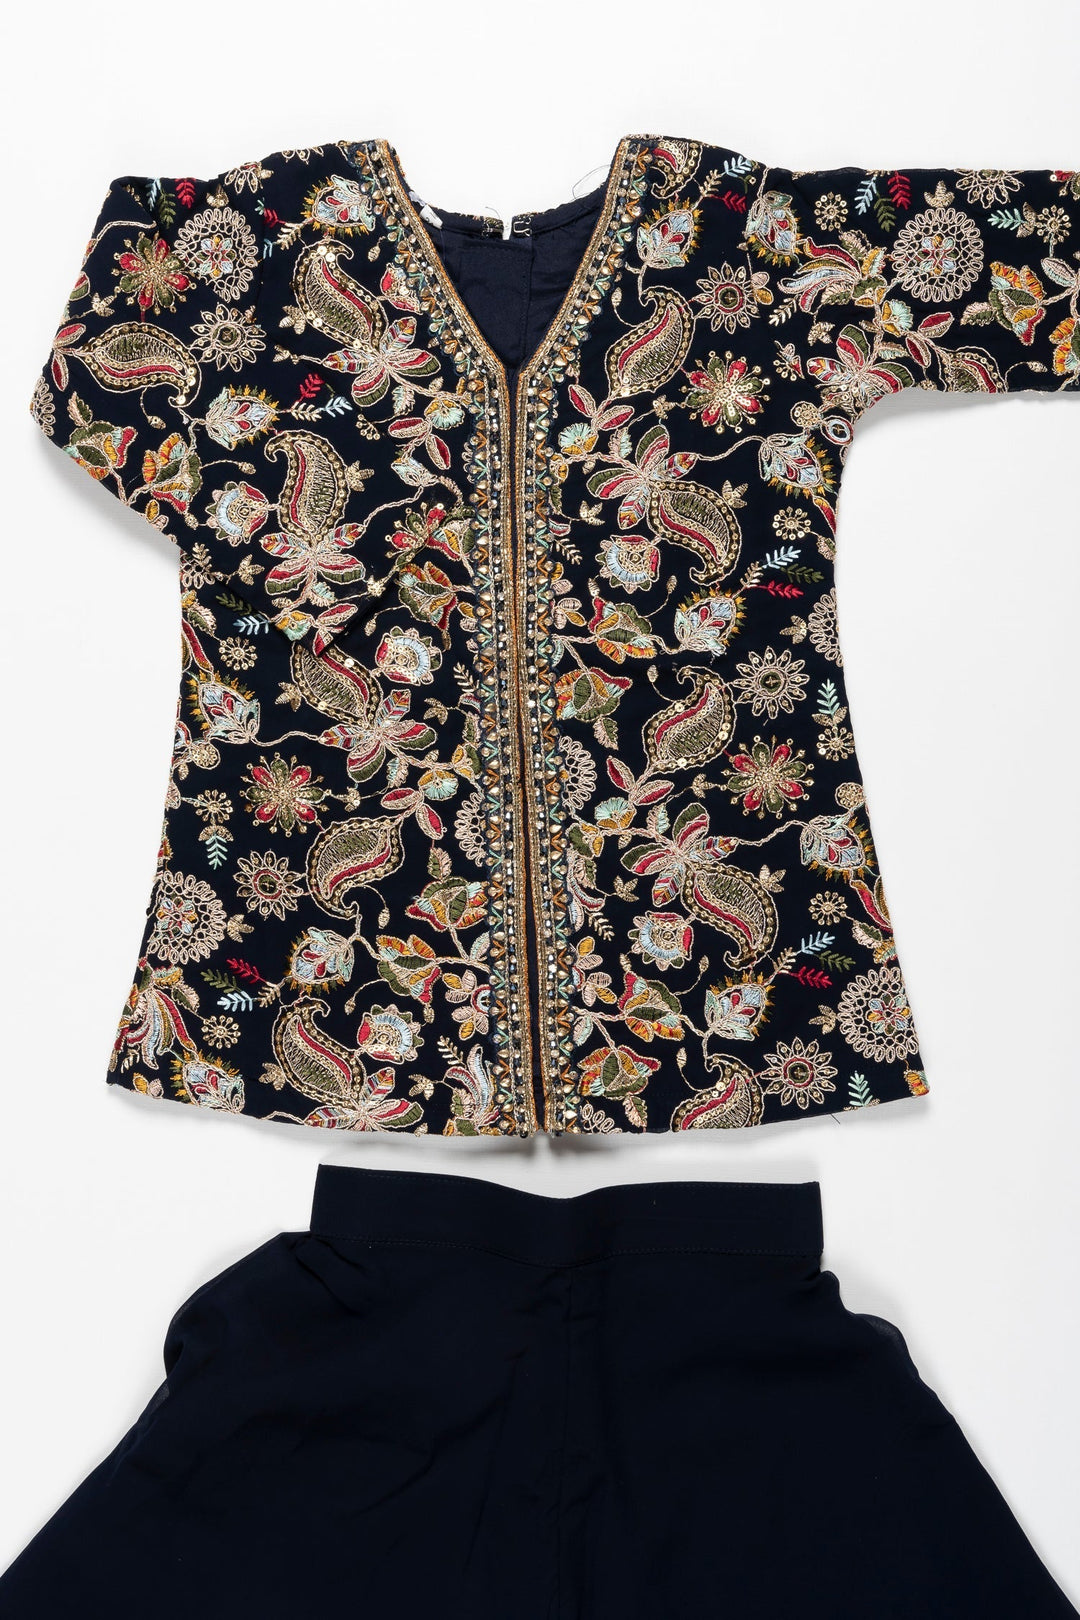 The Nesavu Girls Sharara / Plazo Set Elegant Embroidered Top with Palazzo Set - Traditional Charm with a Modern Twist Nesavu Kids Navy Embroidered Top and Palazzo Set | Fashion for Special Occasions | The Nesavu